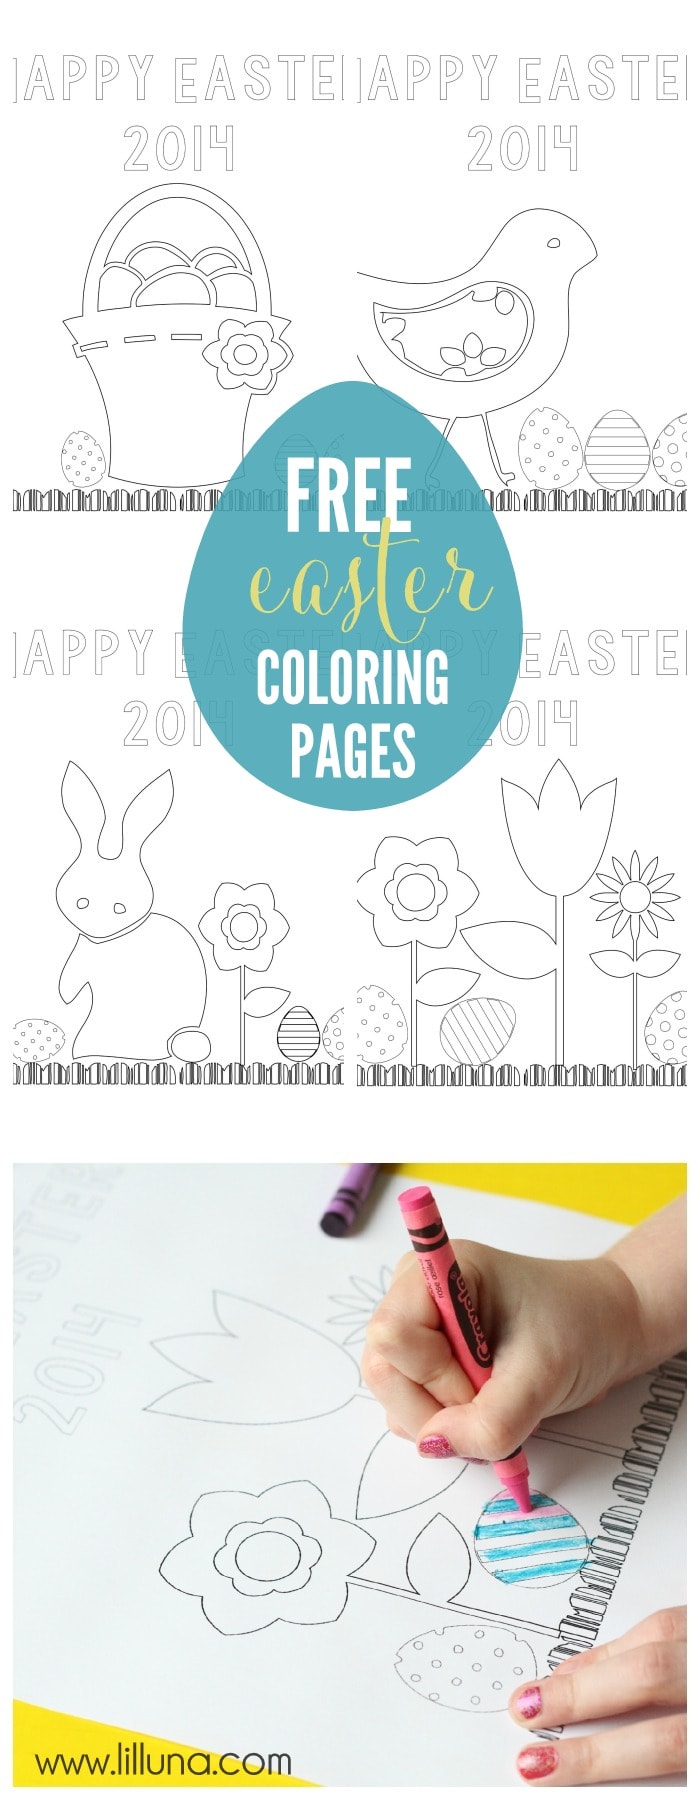 Free Easter Coloring Pages - perfect for the kiddos on Easter Day! { lilluna.com } 